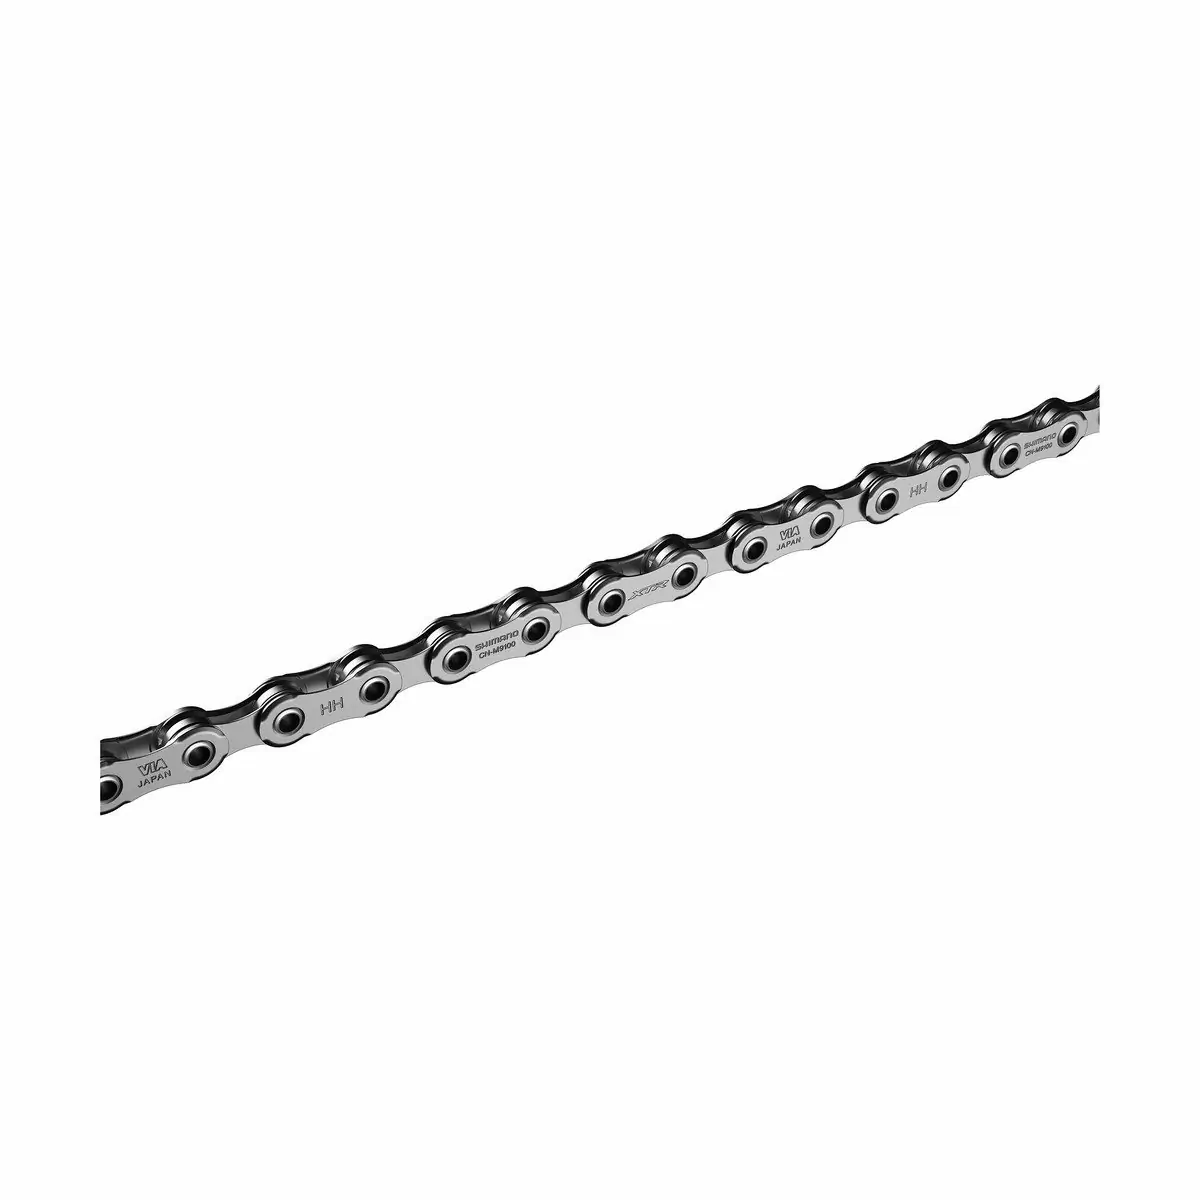 Chain XTR CN-M9100 11/12 speed Quick Link 116 links 2019 - image